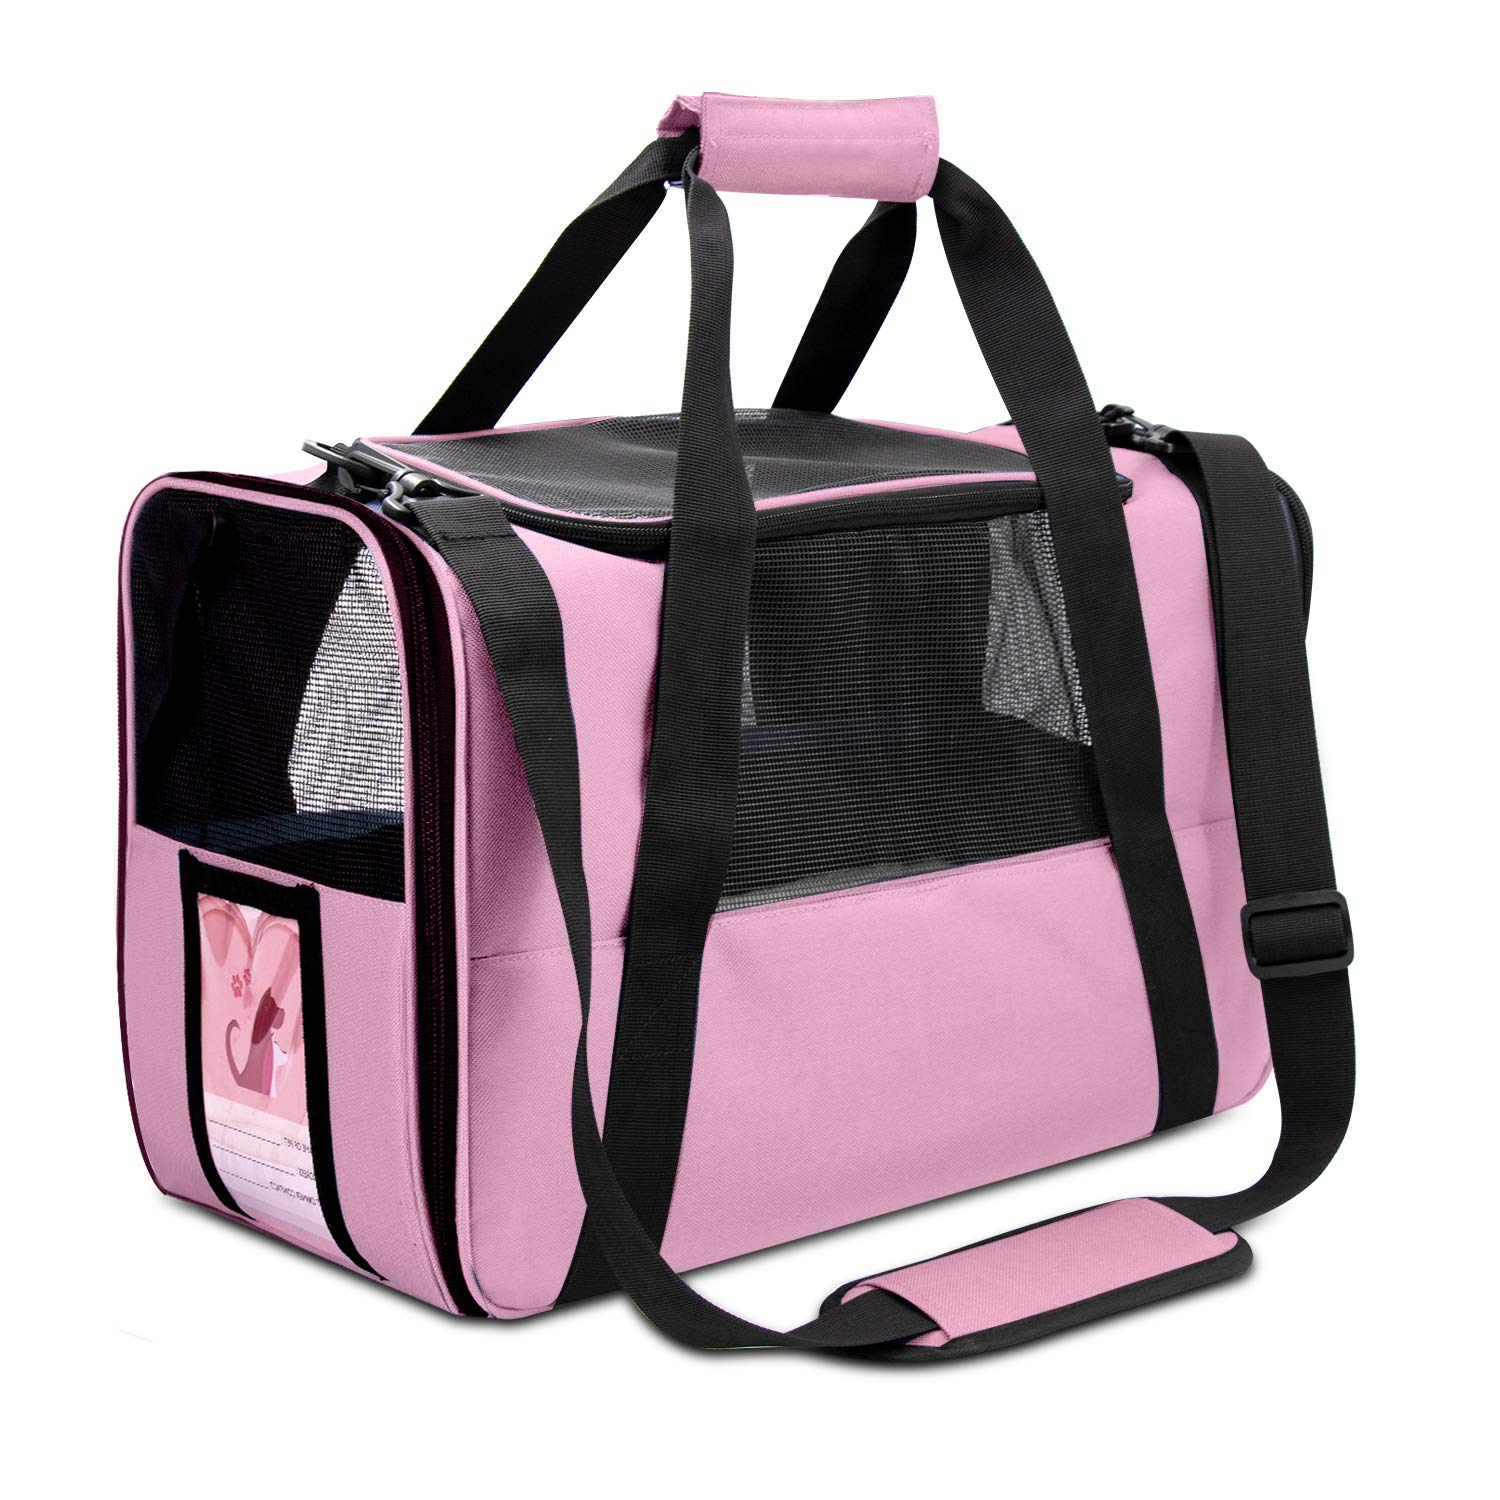 NAT Dog Carrier Cat Carrier Pet Carrier, Airline Approved Dog Carrier with  Mesh Window, Breathable, Collapsible,Soft-Sided,Escape Proof,Easy Storage,  Best for Small Medium Cats Dogs Medium Pink